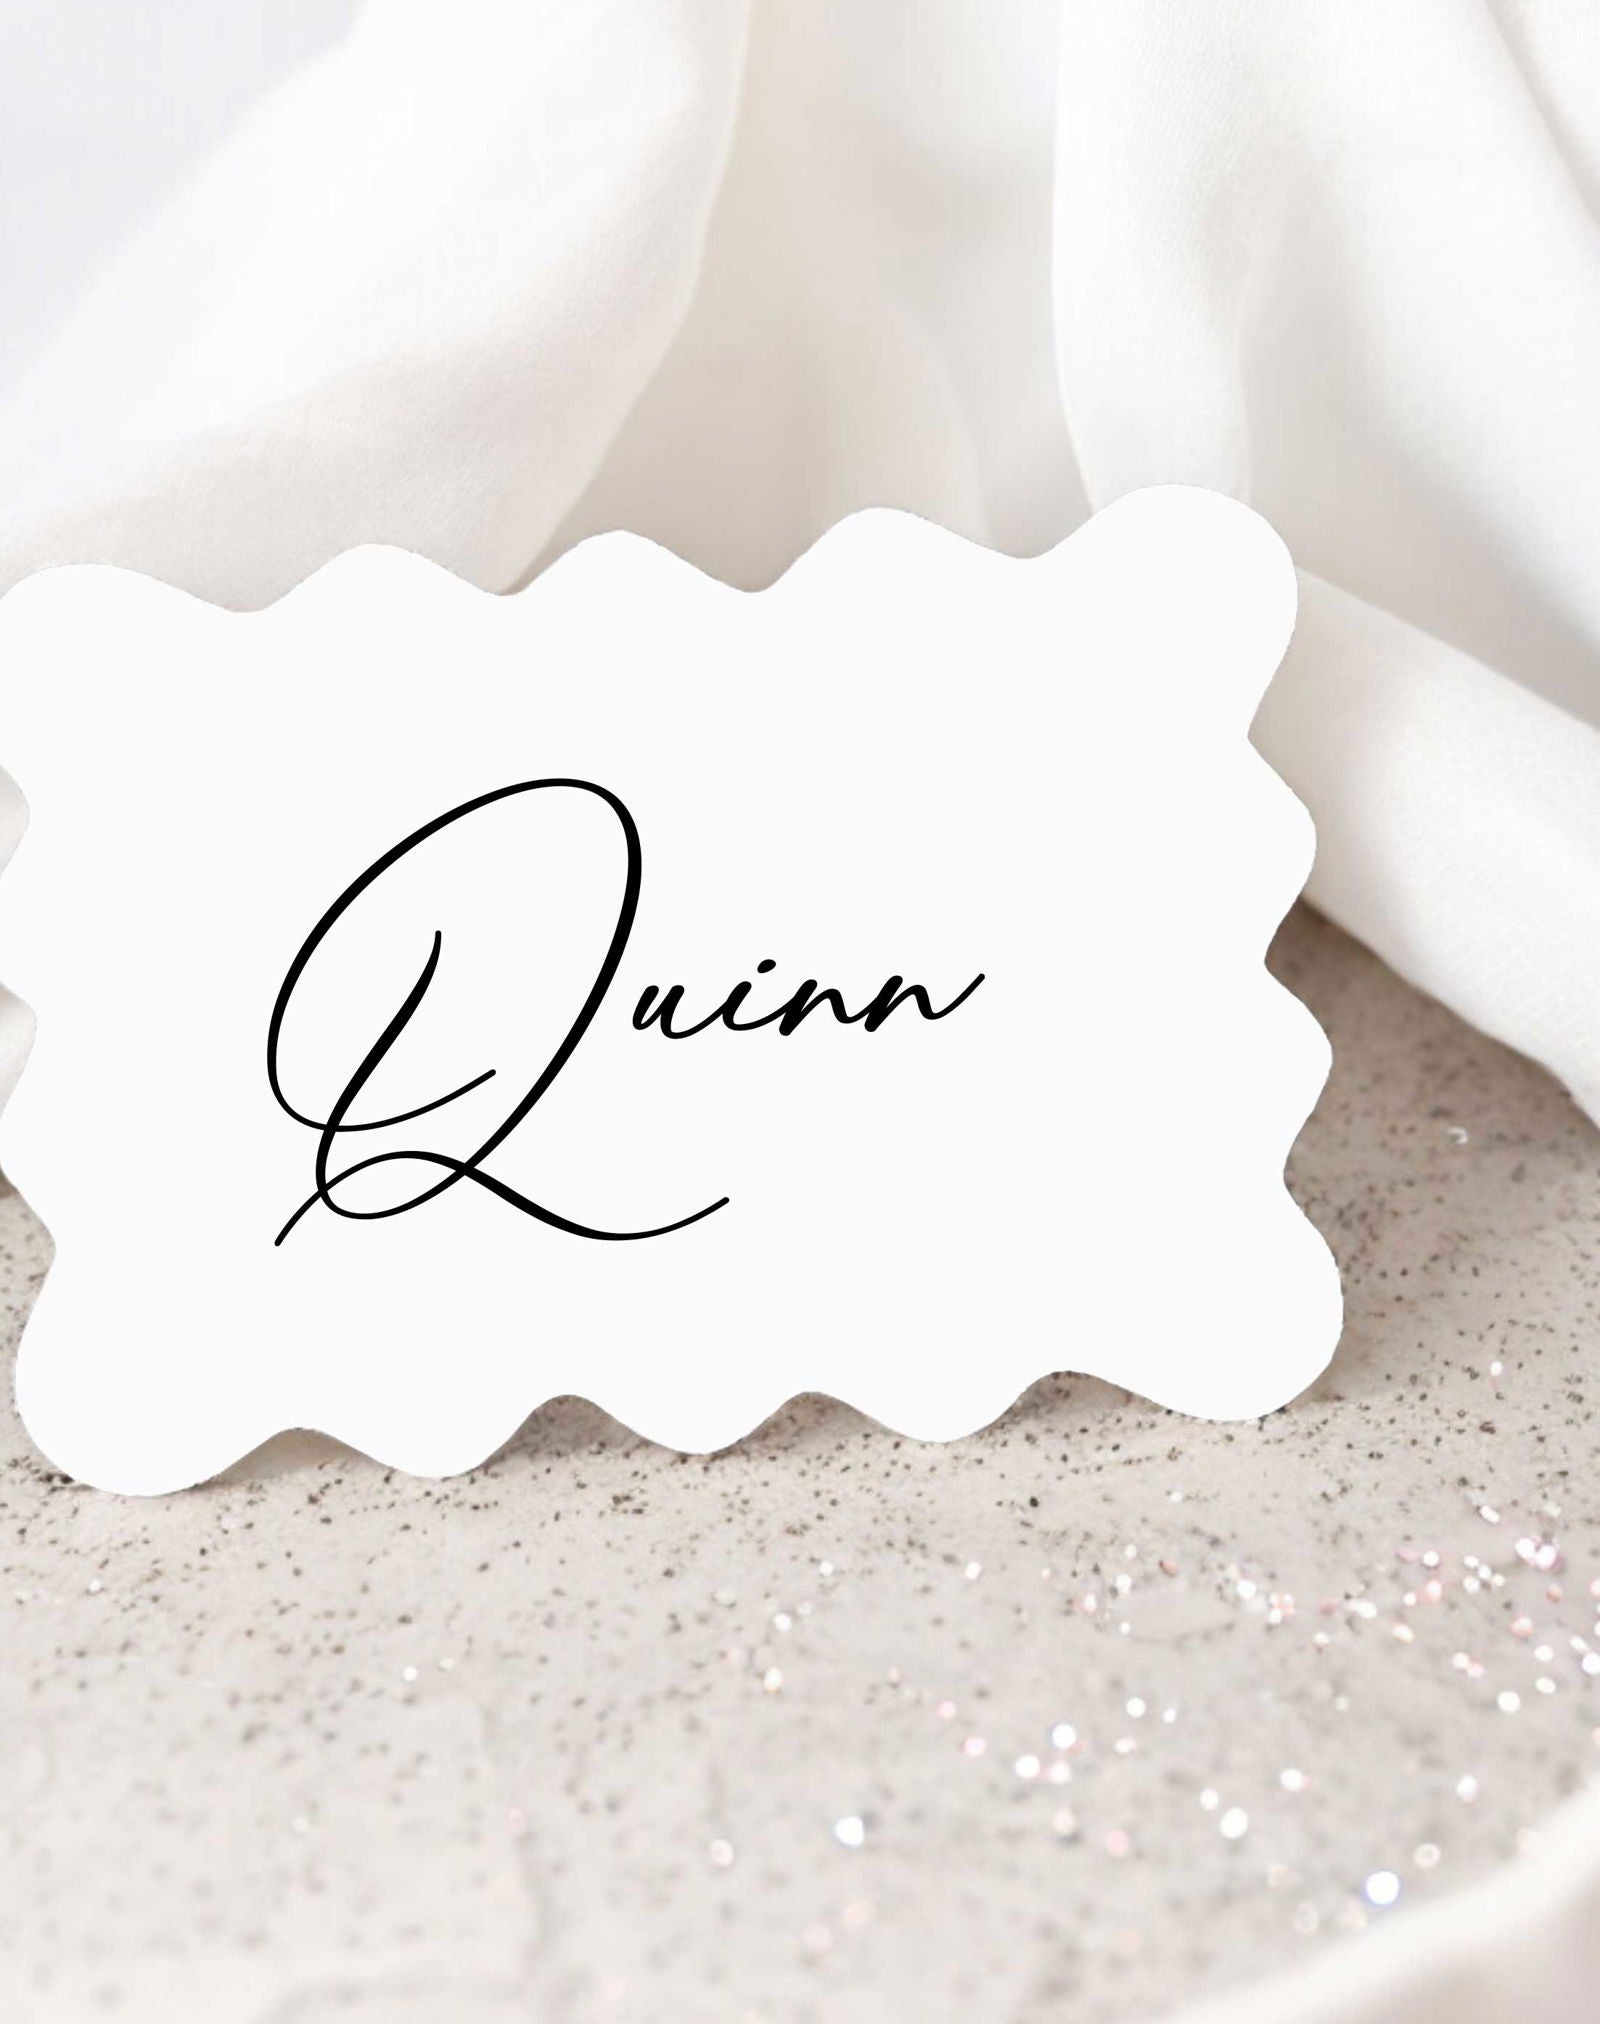 Quinn | Traditional Place Card - Ivy and Gold Wedding Stationery -  